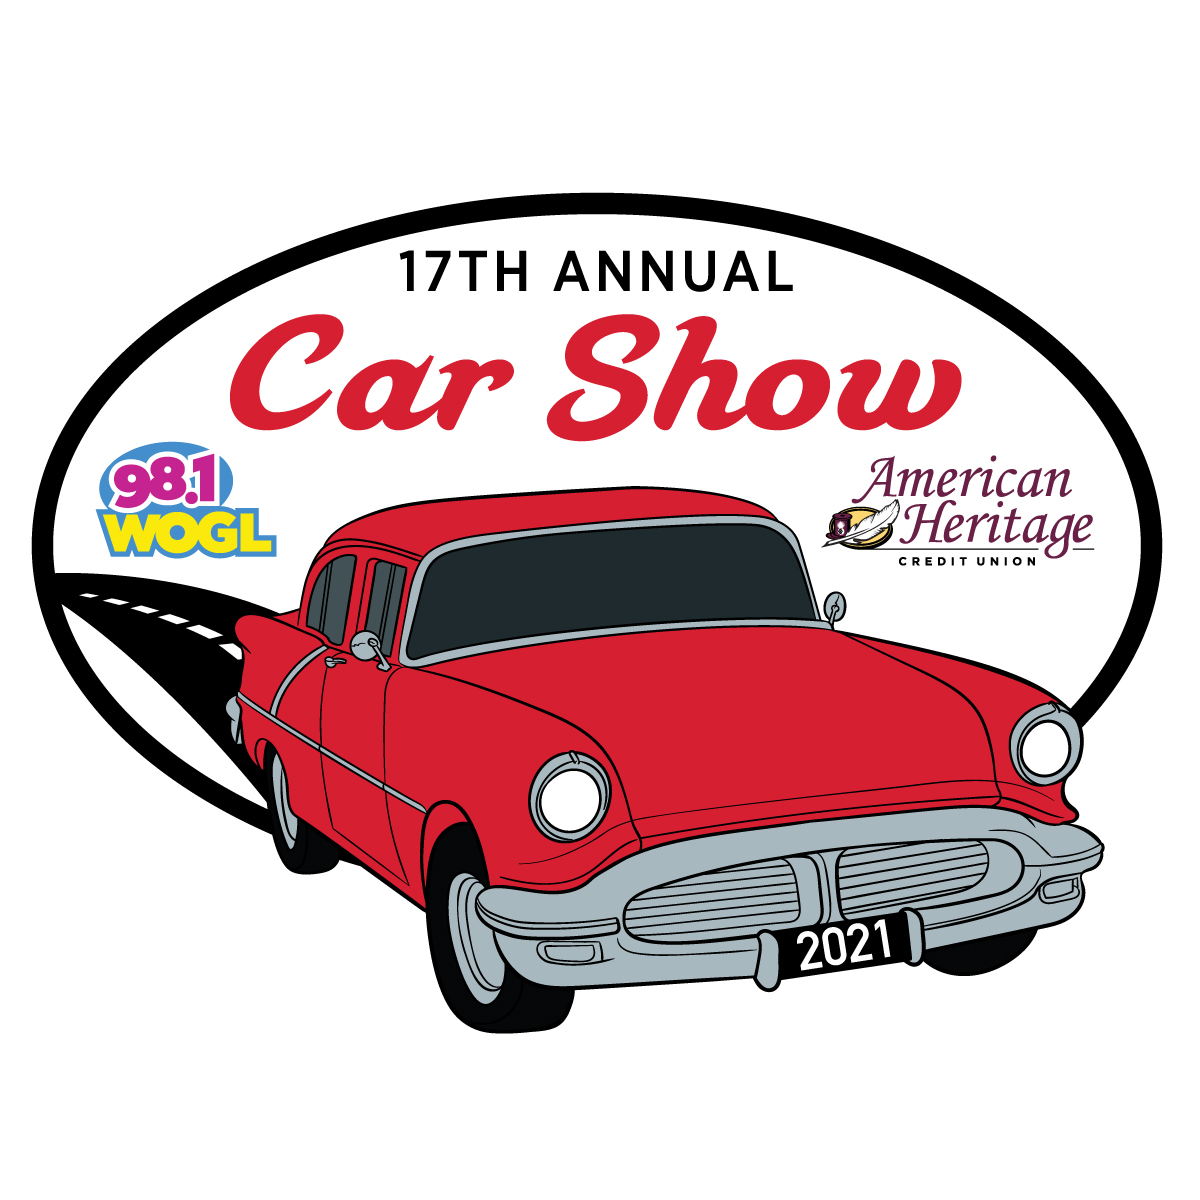 Image of Car with car show information